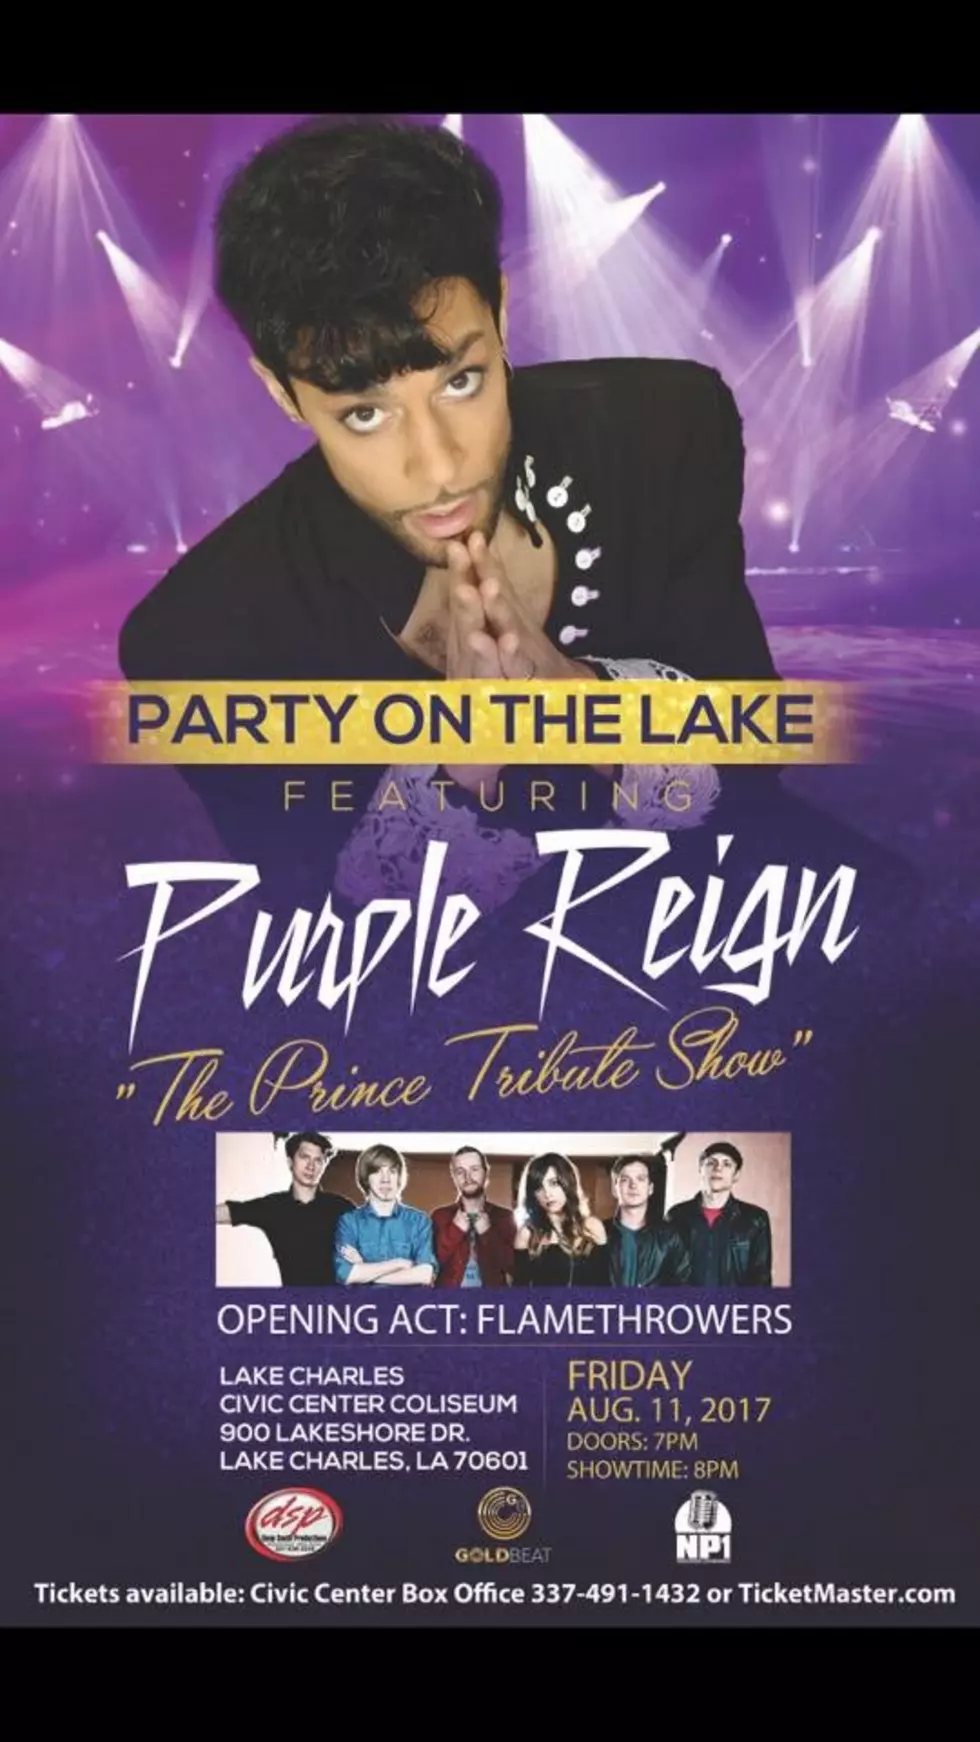 Join Us At The Lake Charles Civic Center Tomorrow And Purchase Purple Reign Tickets [PHOTO]